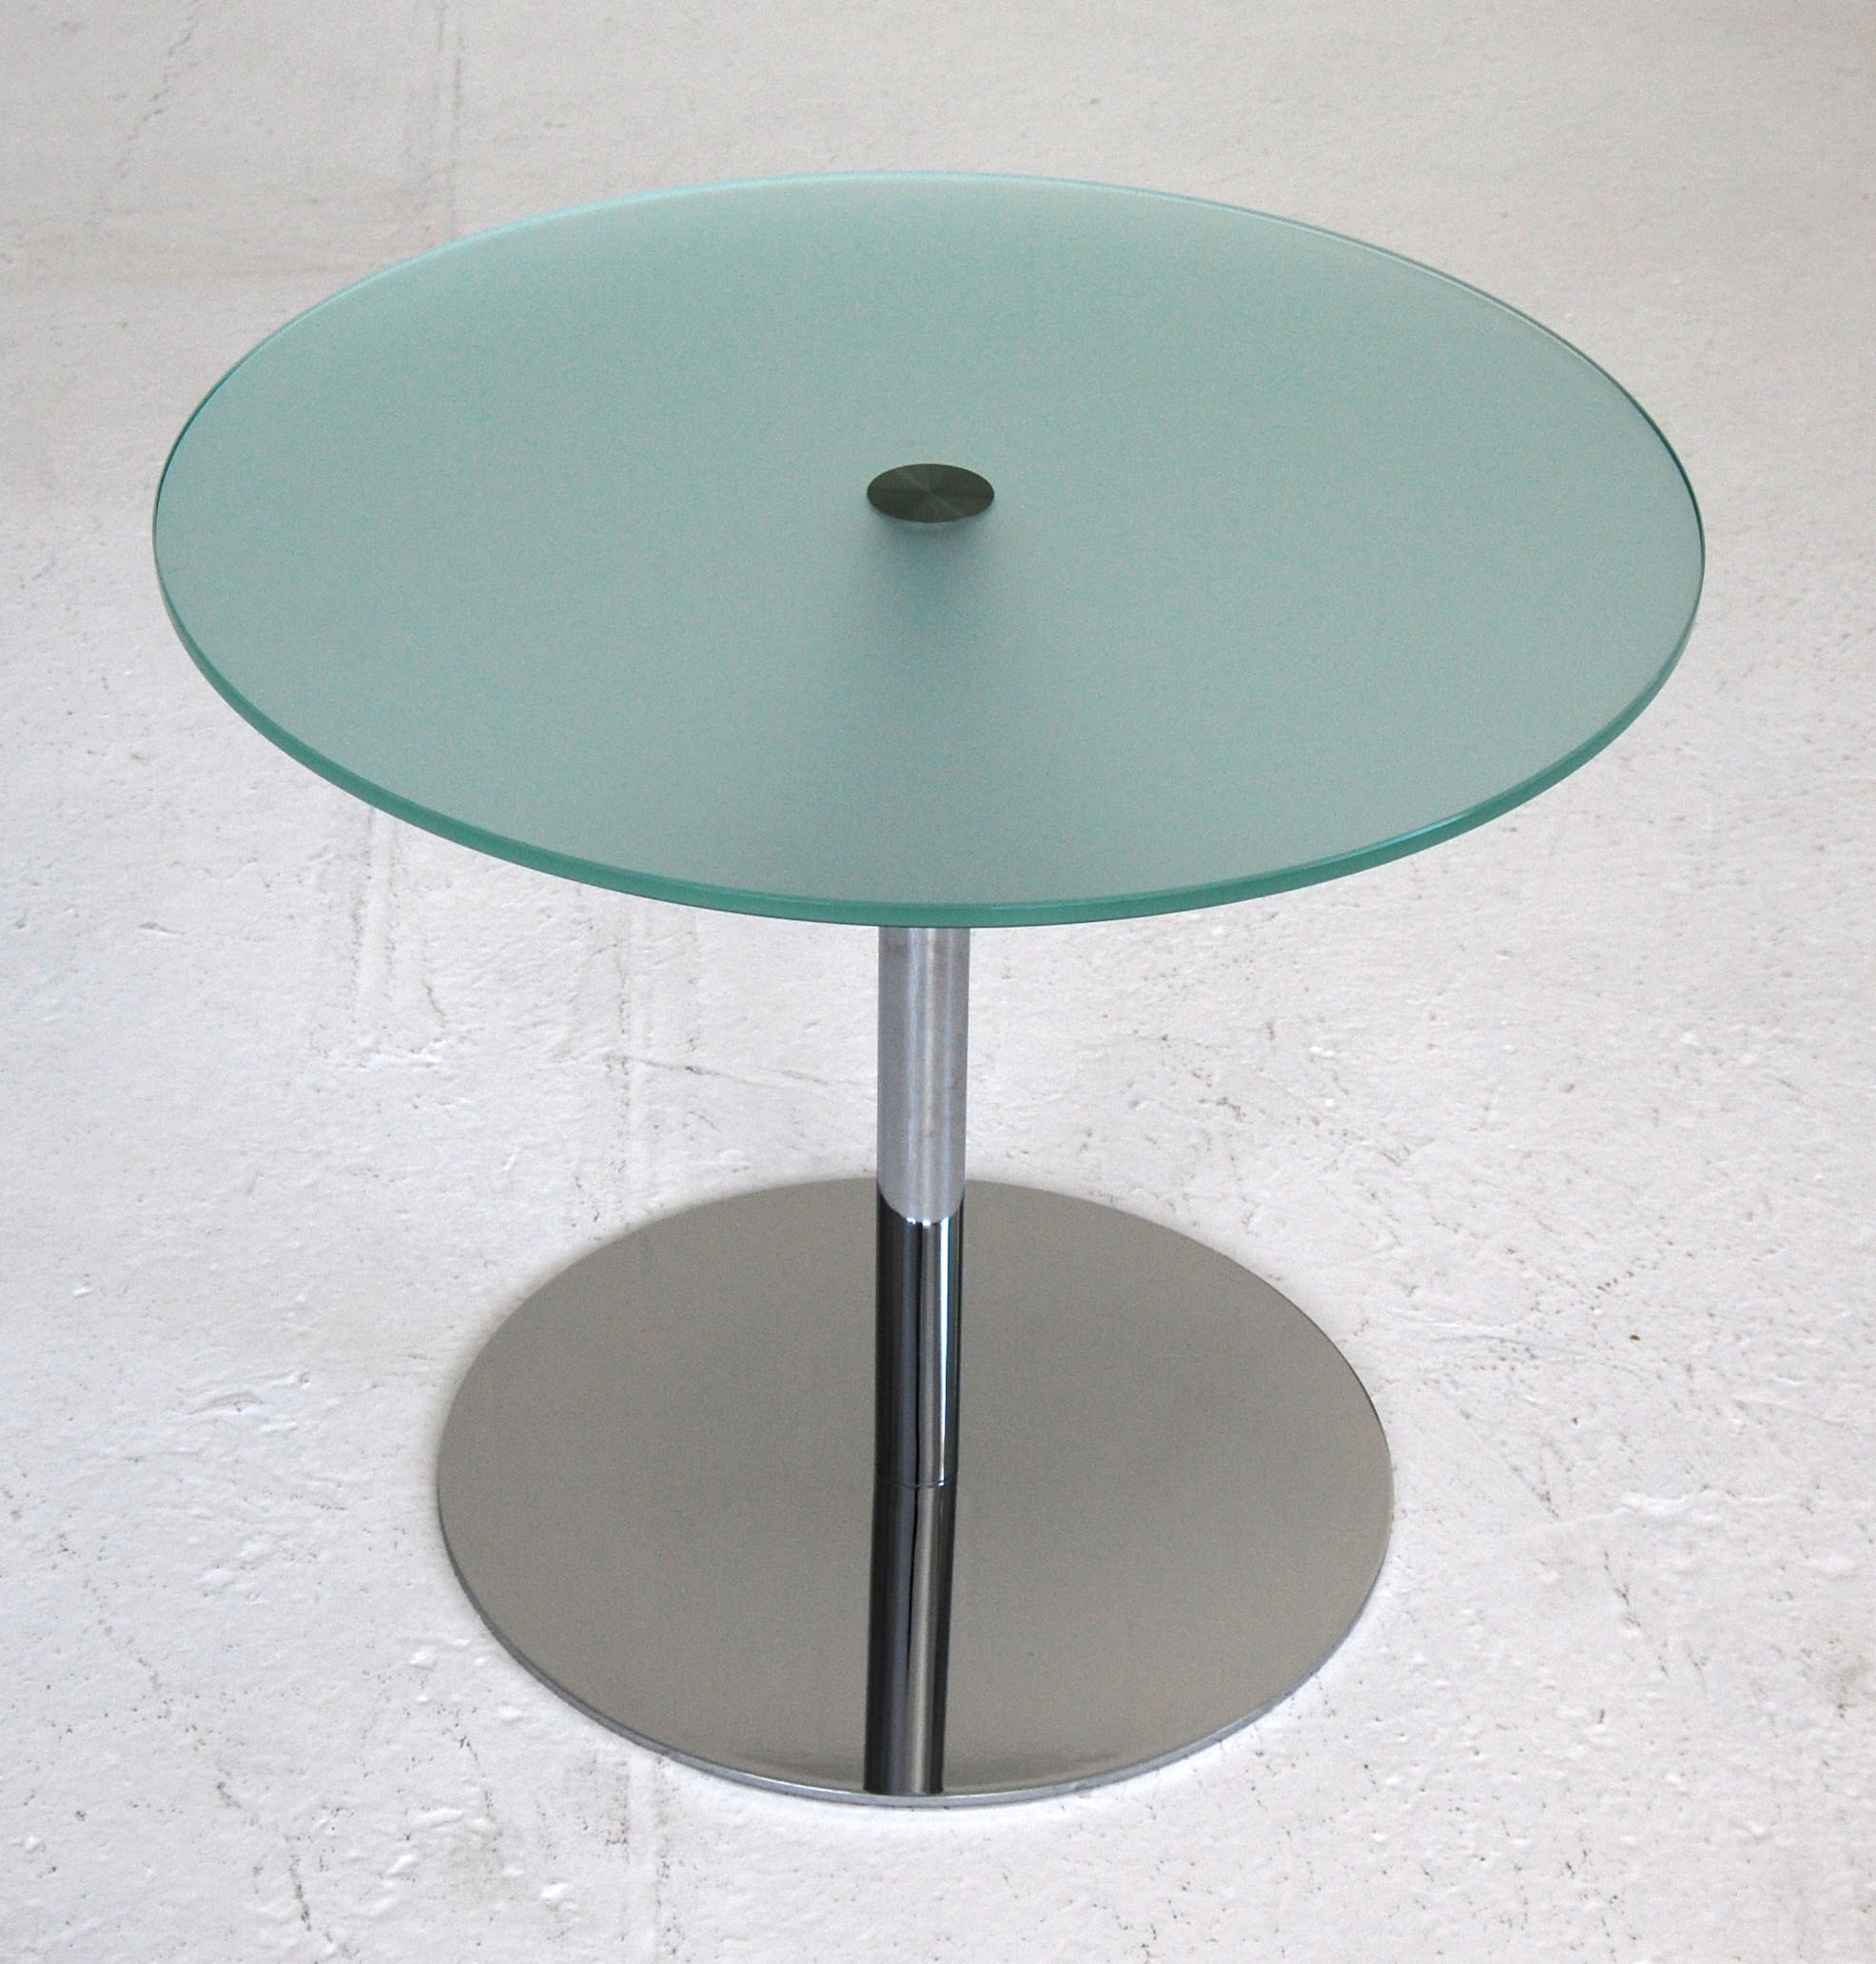 hm20 table with glass top.JPG